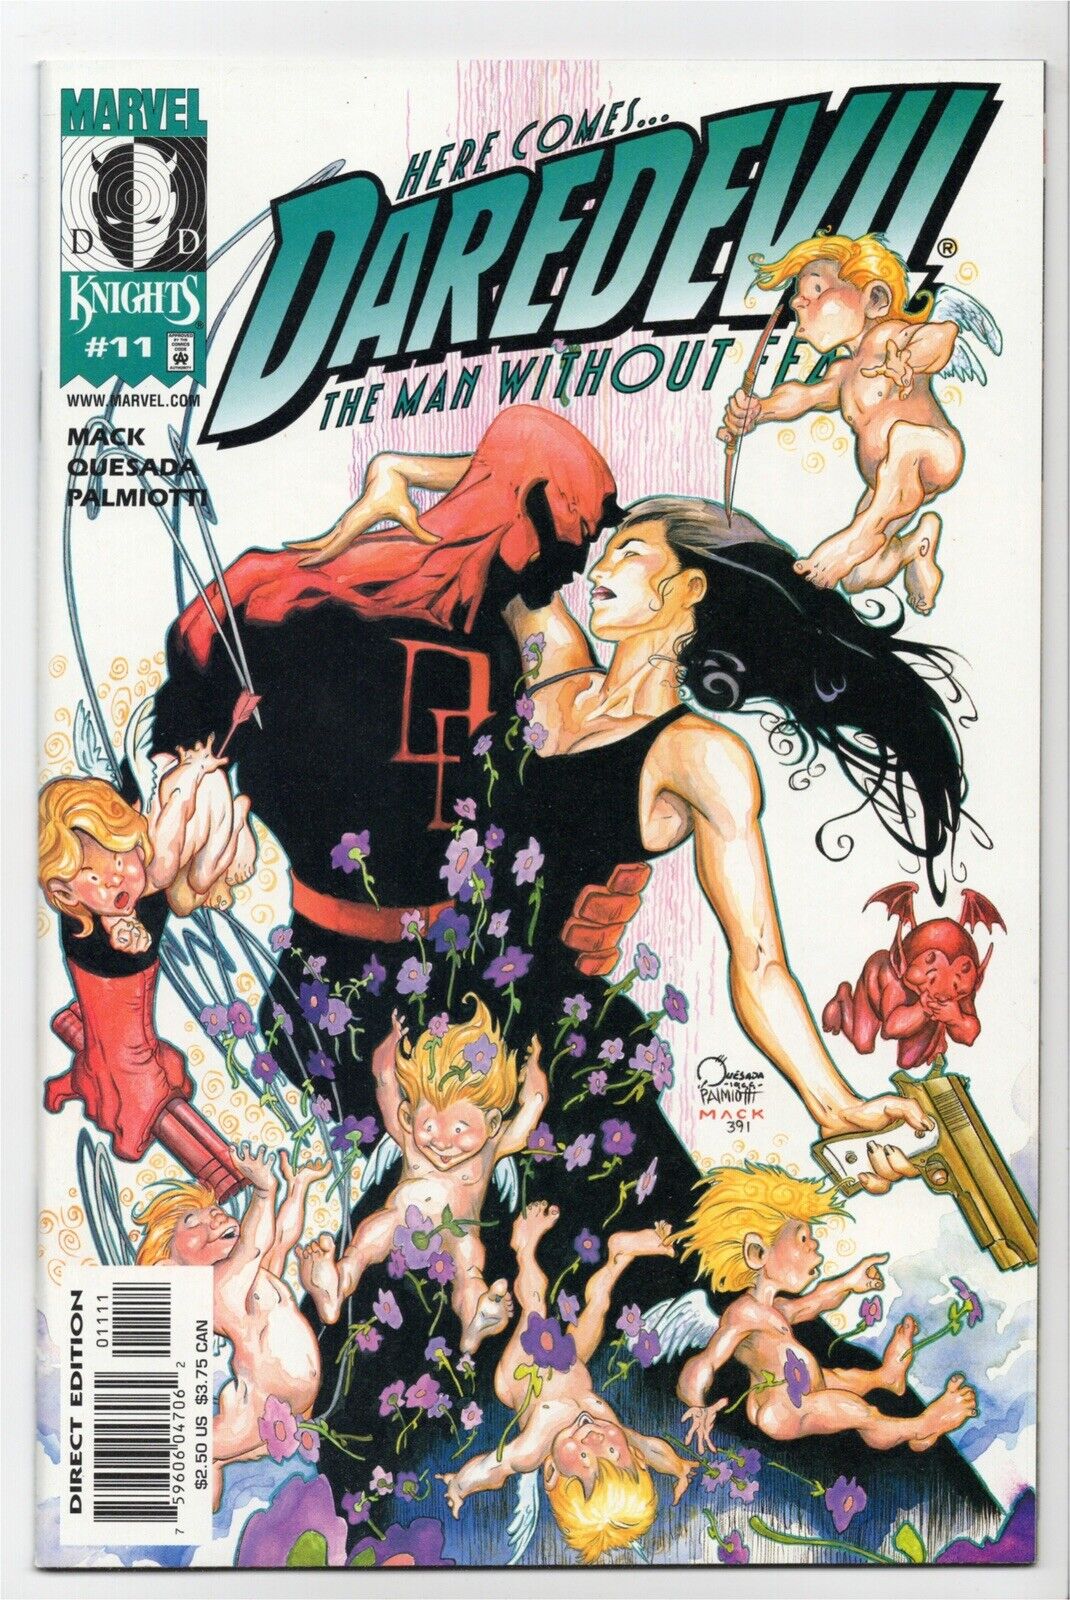 DAREDEVIL #11 (2000) NM FIRST FULL APPEARANCE OF ECHO MAYA LOPEZ - MARVEL COMIC